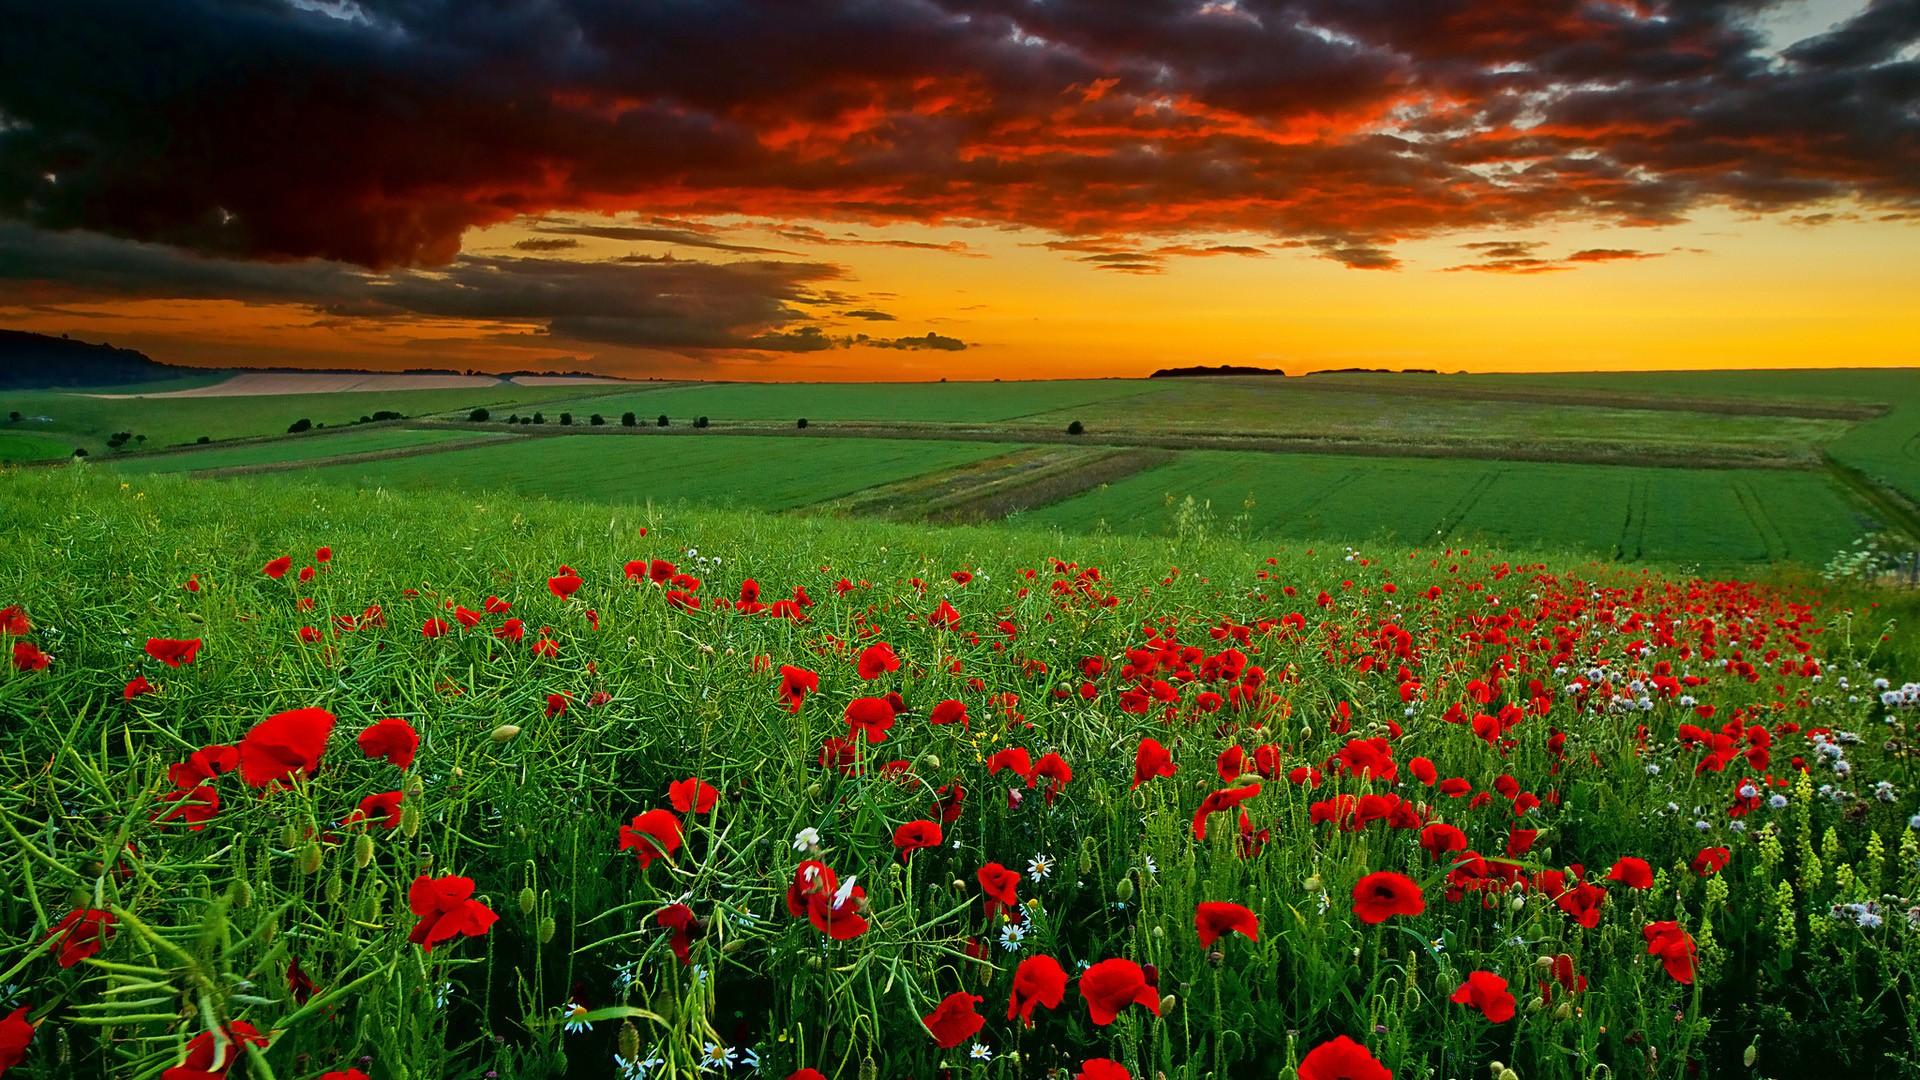 Nature Hd Wallpaper Free Download With Red Ros 86 Wallpaper | HD ...